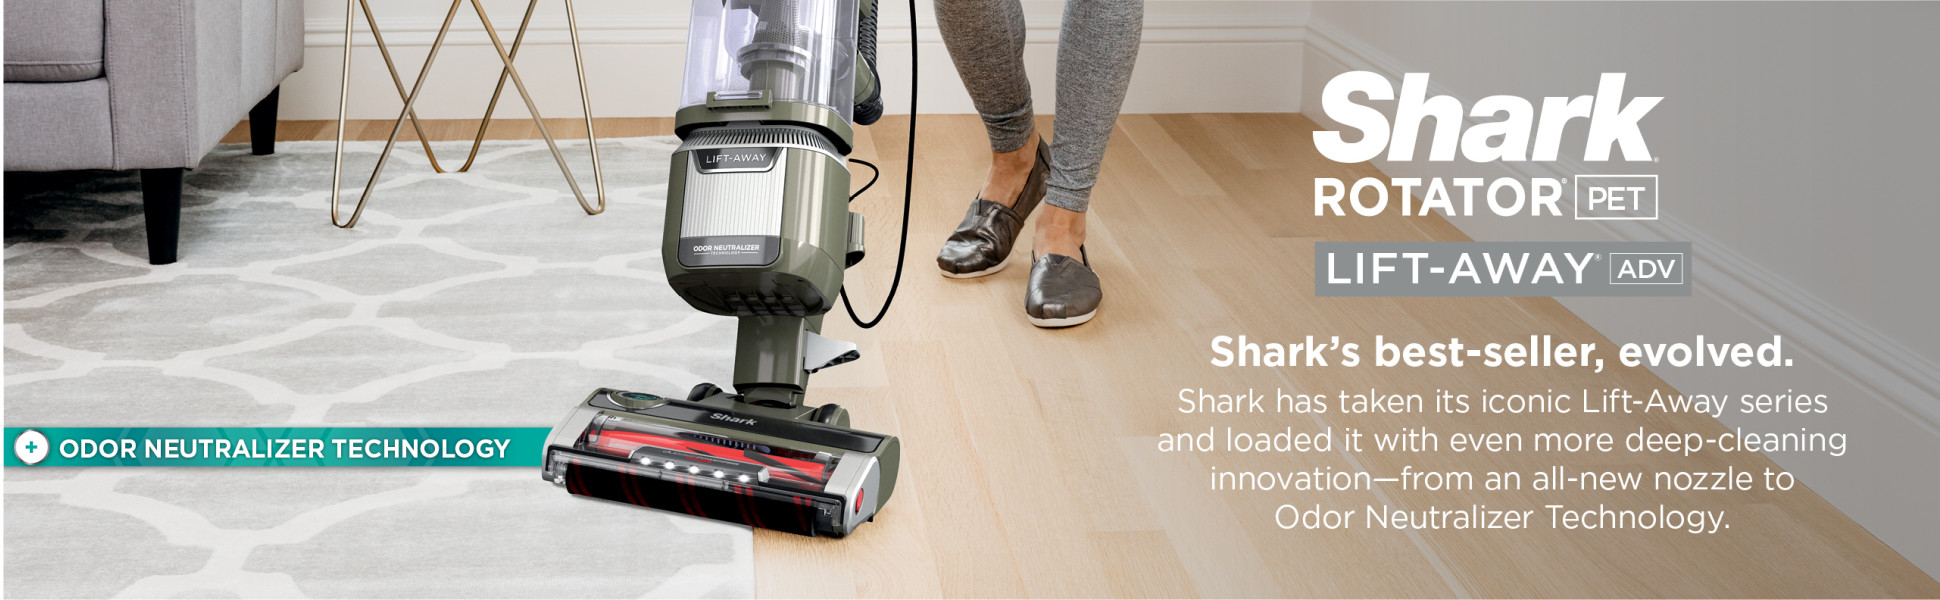 Shark Rotator Pet Lift-Away ADV Upright Vacuum with DuoClean PowerFins  HairPro & Odor Neutralizer Technology 